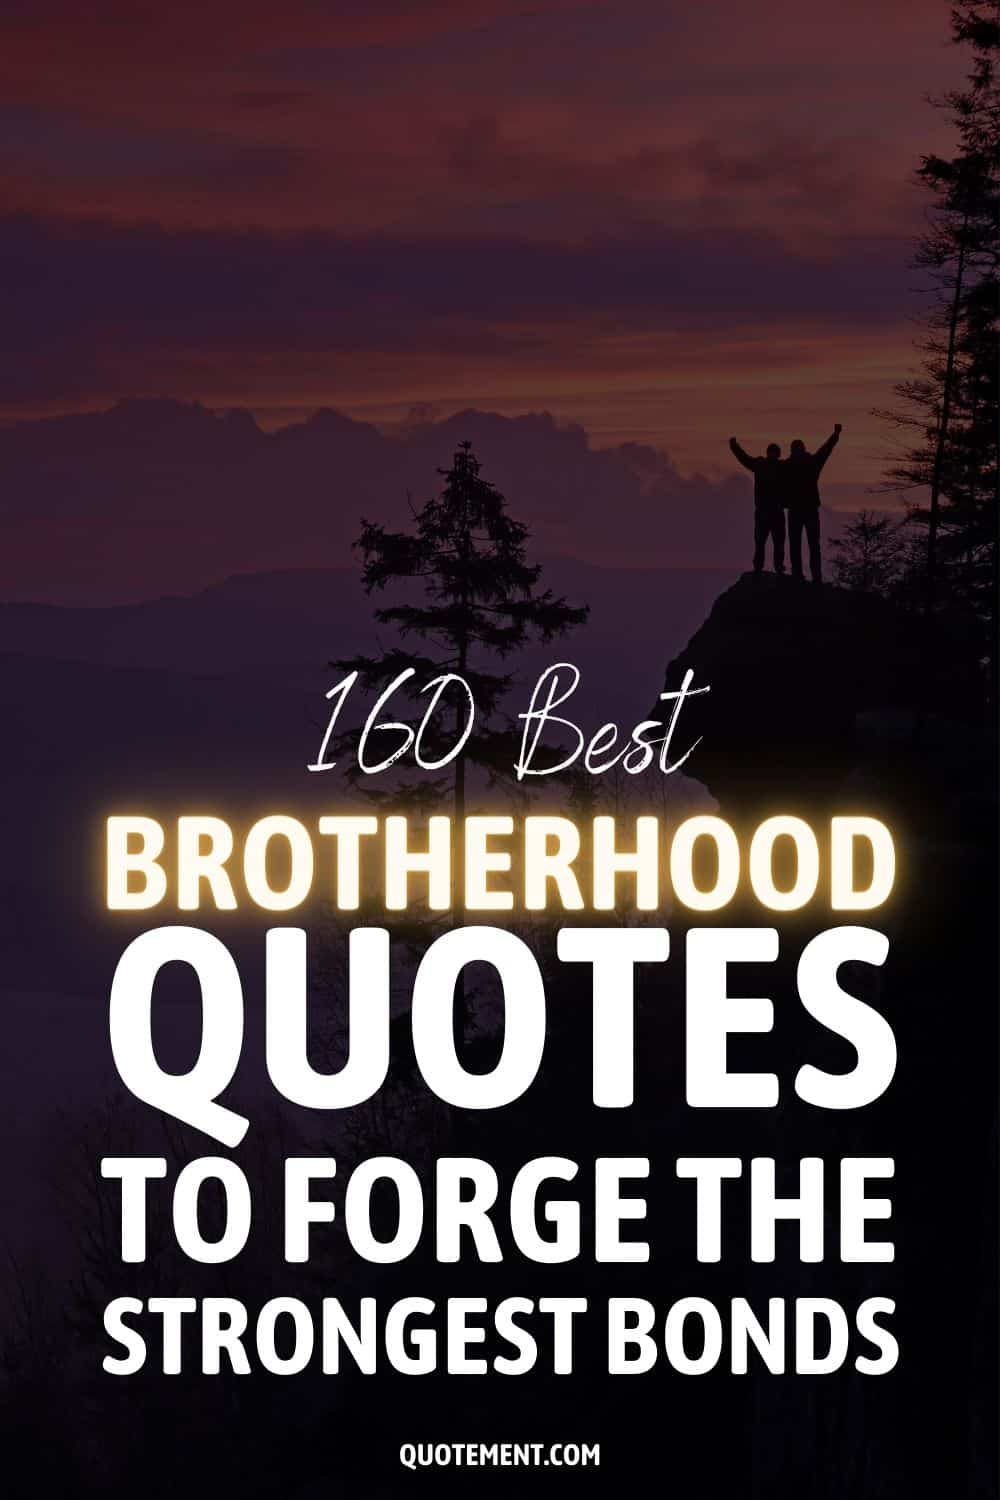 160 Best Brotherhood Quotes To Forge The Strongest Bonds
